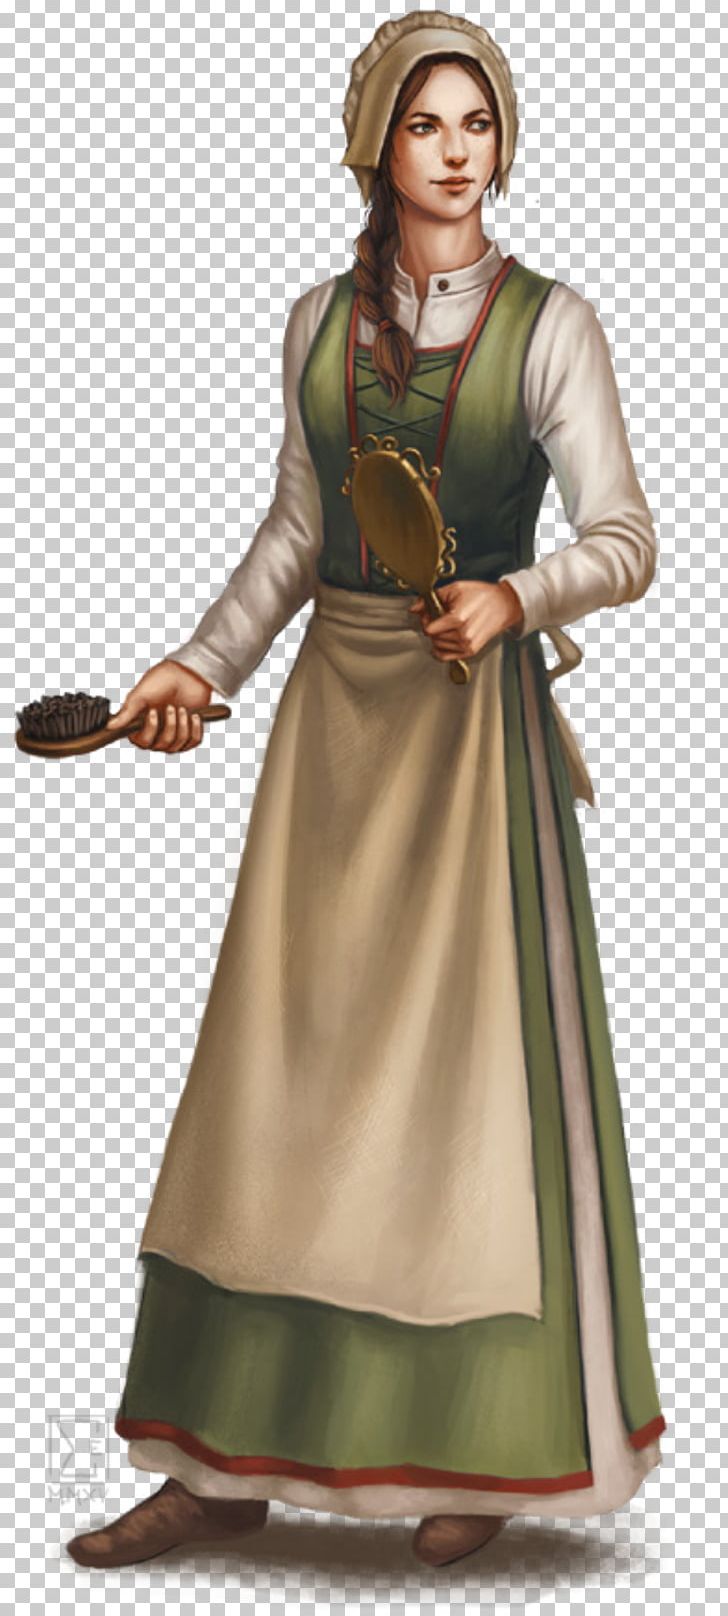 Pathfinder Roleplaying Game Dungeons & Dragons Character Woman Role-playing Game PNG, Clipart, Art, Character, Cleric, Costume, Costume Design Free PNG Download